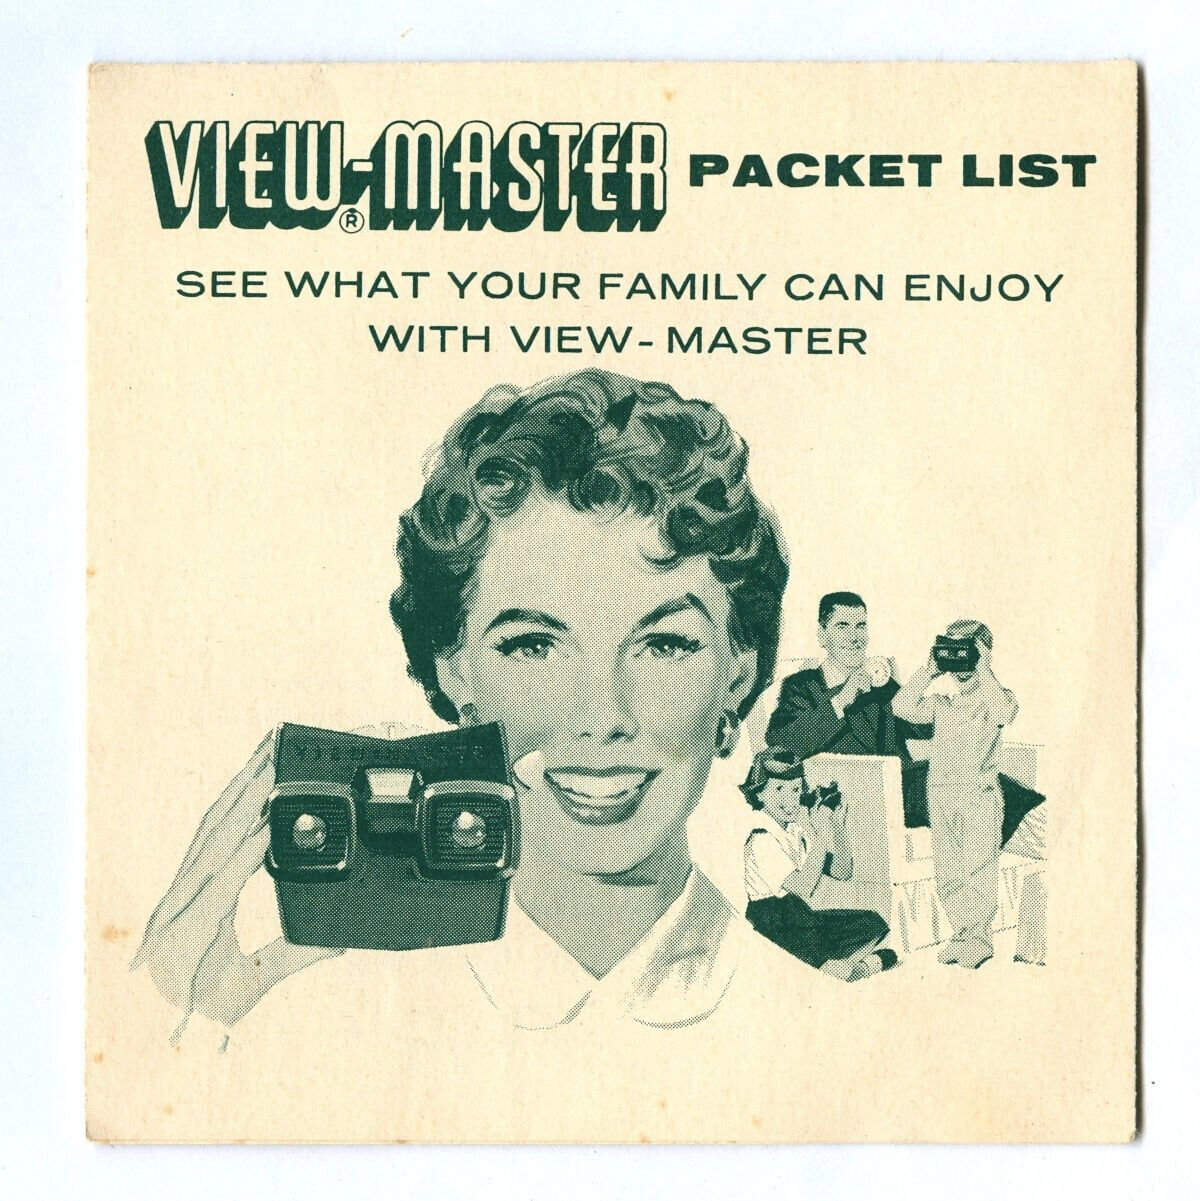 Vintage 1958 Sawyer VIEW-MASTER Packet List 3-D Stereoscope Viewer Advertising